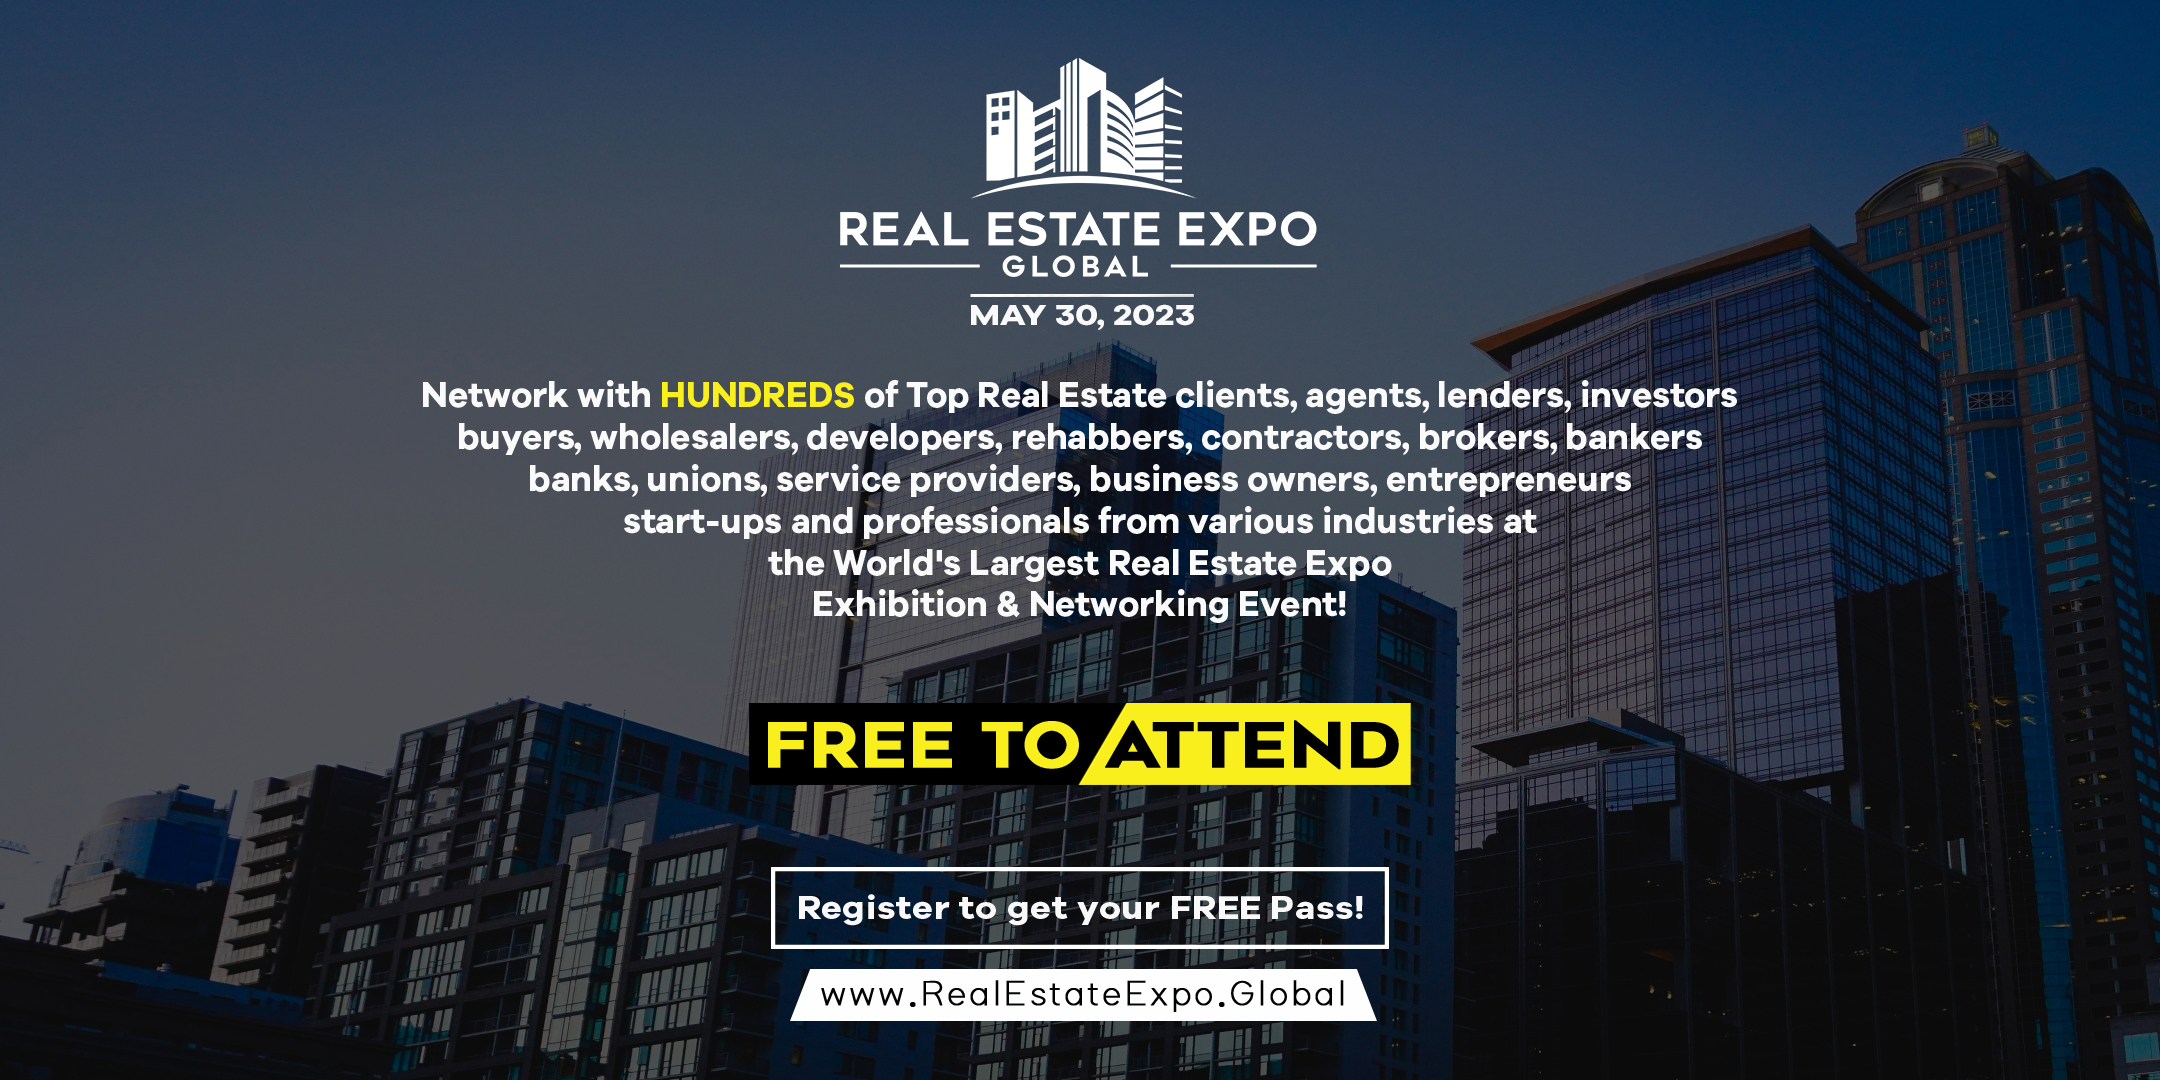 Real Estate Expo Global